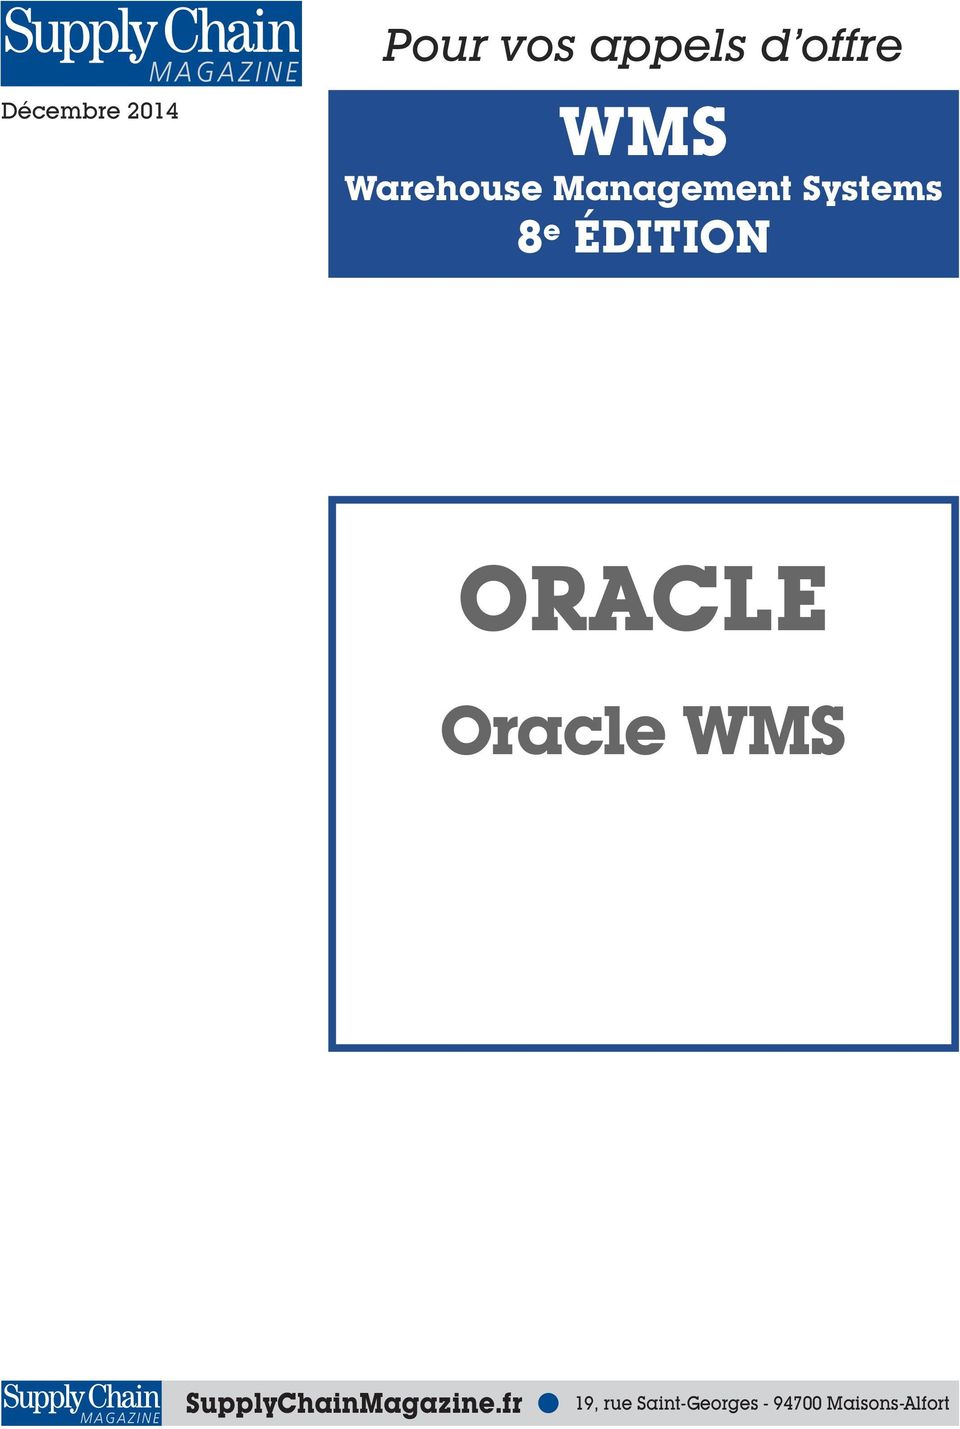 ORACLE Oracle WMS SupplyChainMagazine.